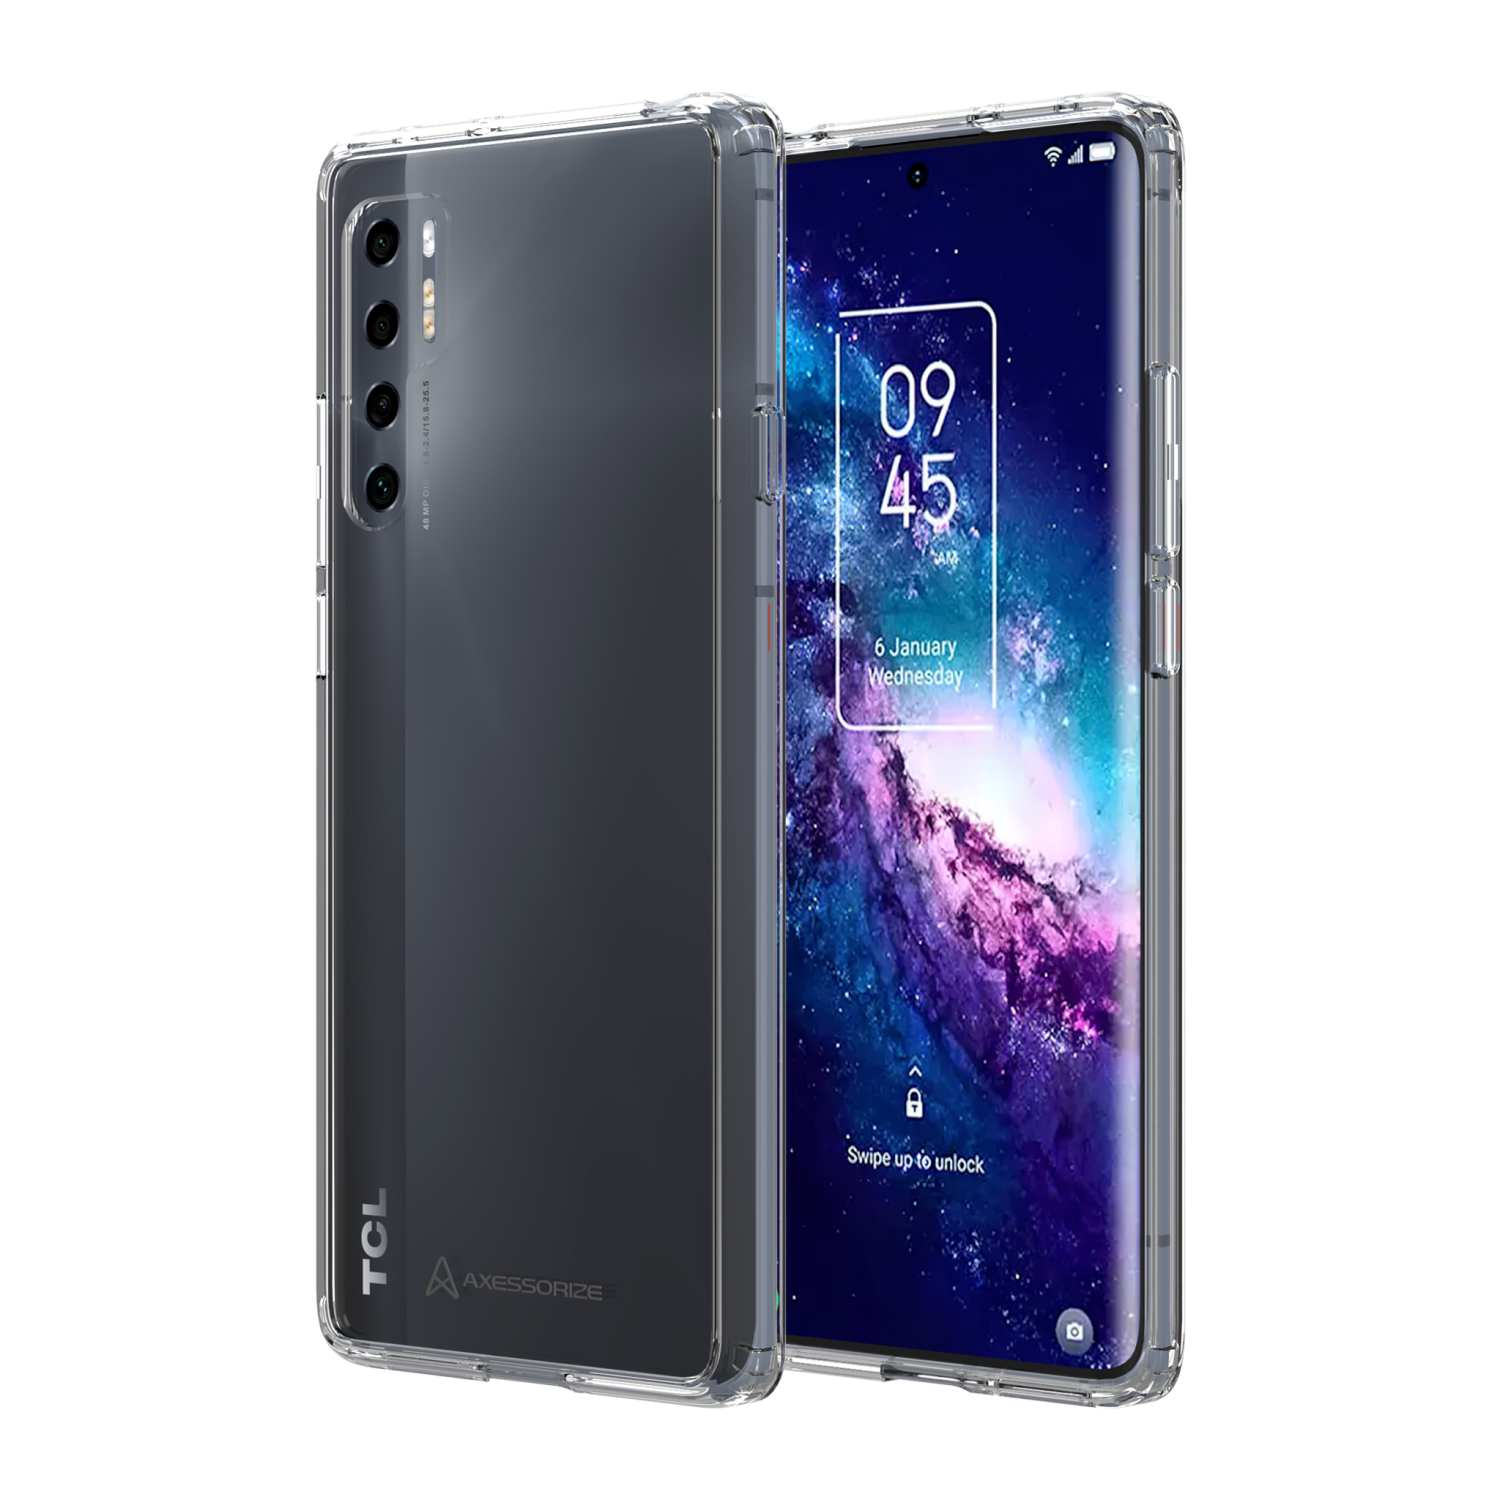 Axessorize ULTRA CLEAR Drop-tested Clear Case for TCL 20 Pro 5G